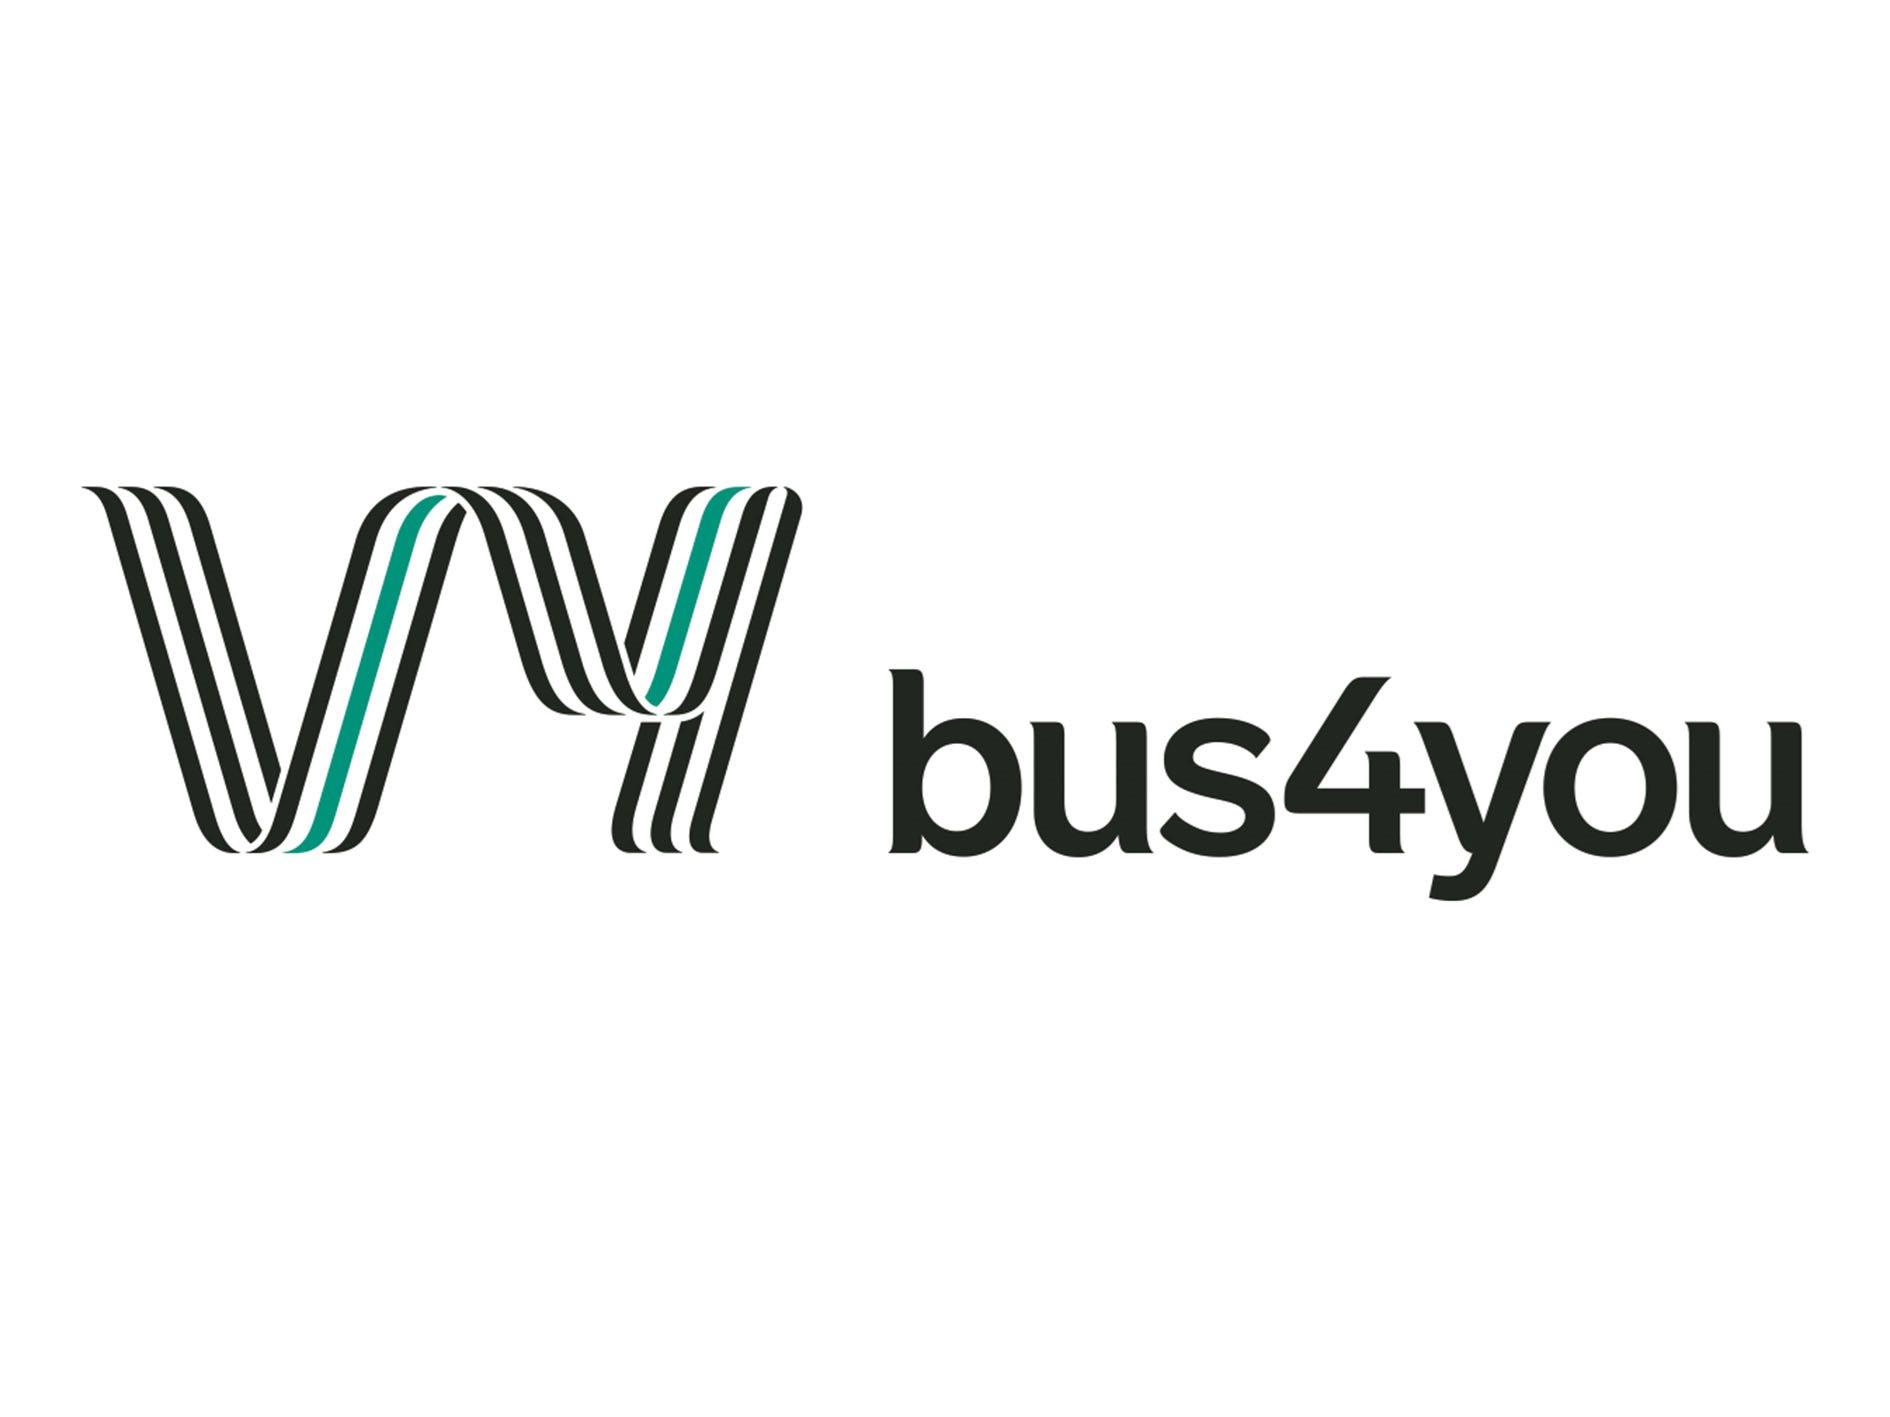 Logo of Vy bus4you